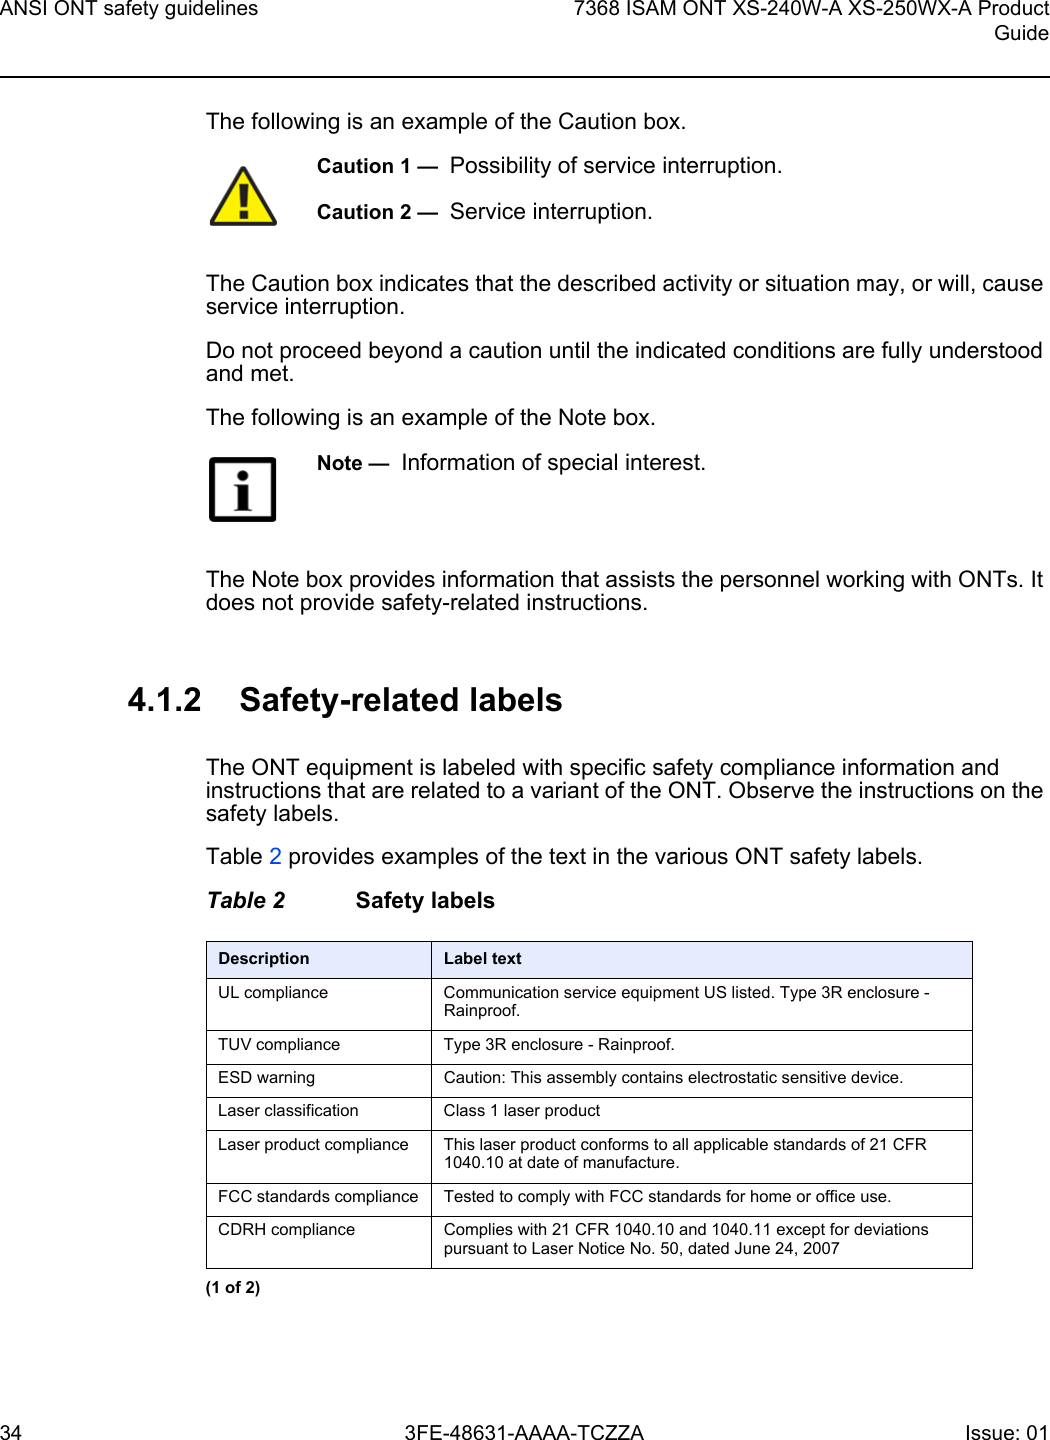 ANSI ONT safety guidelines347368 ISAM ONT XS-240W-A XS-250WX-A ProductGuide3FE-48631-AAAA-TCZZA Issue: 01 The following is an example of the Caution box.The Caution box indicates that the described activity or situation may, or will, cause service interruption.Do not proceed beyond a caution until the indicated conditions are fully understood and met.The following is an example of the Note box.The Note box provides information that assists the personnel working with ONTs. It does not provide safety-related instructions.4.1.2 Safety-related labelsThe ONT equipment is labeled with specific safety compliance information and instructions that are related to a variant of the ONT. Observe the instructions on the safety labels.Table 2 provides examples of the text in the various ONT safety labels.Table 2 Safety labelsCaution 1 —  Possibility of service interruption.Caution 2 —  Service interruption.Note —  Information of special interest.Description Label textUL compliance Communication service equipment US listed. Type 3R enclosure - Rainproof.TUV compliance Type 3R enclosure - Rainproof.ESD warning Caution: This assembly contains electrostatic sensitive device.Laser classification Class 1 laser productLaser product compliance This laser product conforms to all applicable standards of 21 CFR 1040.10 at date of manufacture.FCC standards compliance Tested to comply with FCC standards for home or office use.CDRH compliance Complies with 21 CFR 1040.10 and 1040.11 except for deviations pursuant to Laser Notice No. 50, dated June 24, 2007(1 of 2)